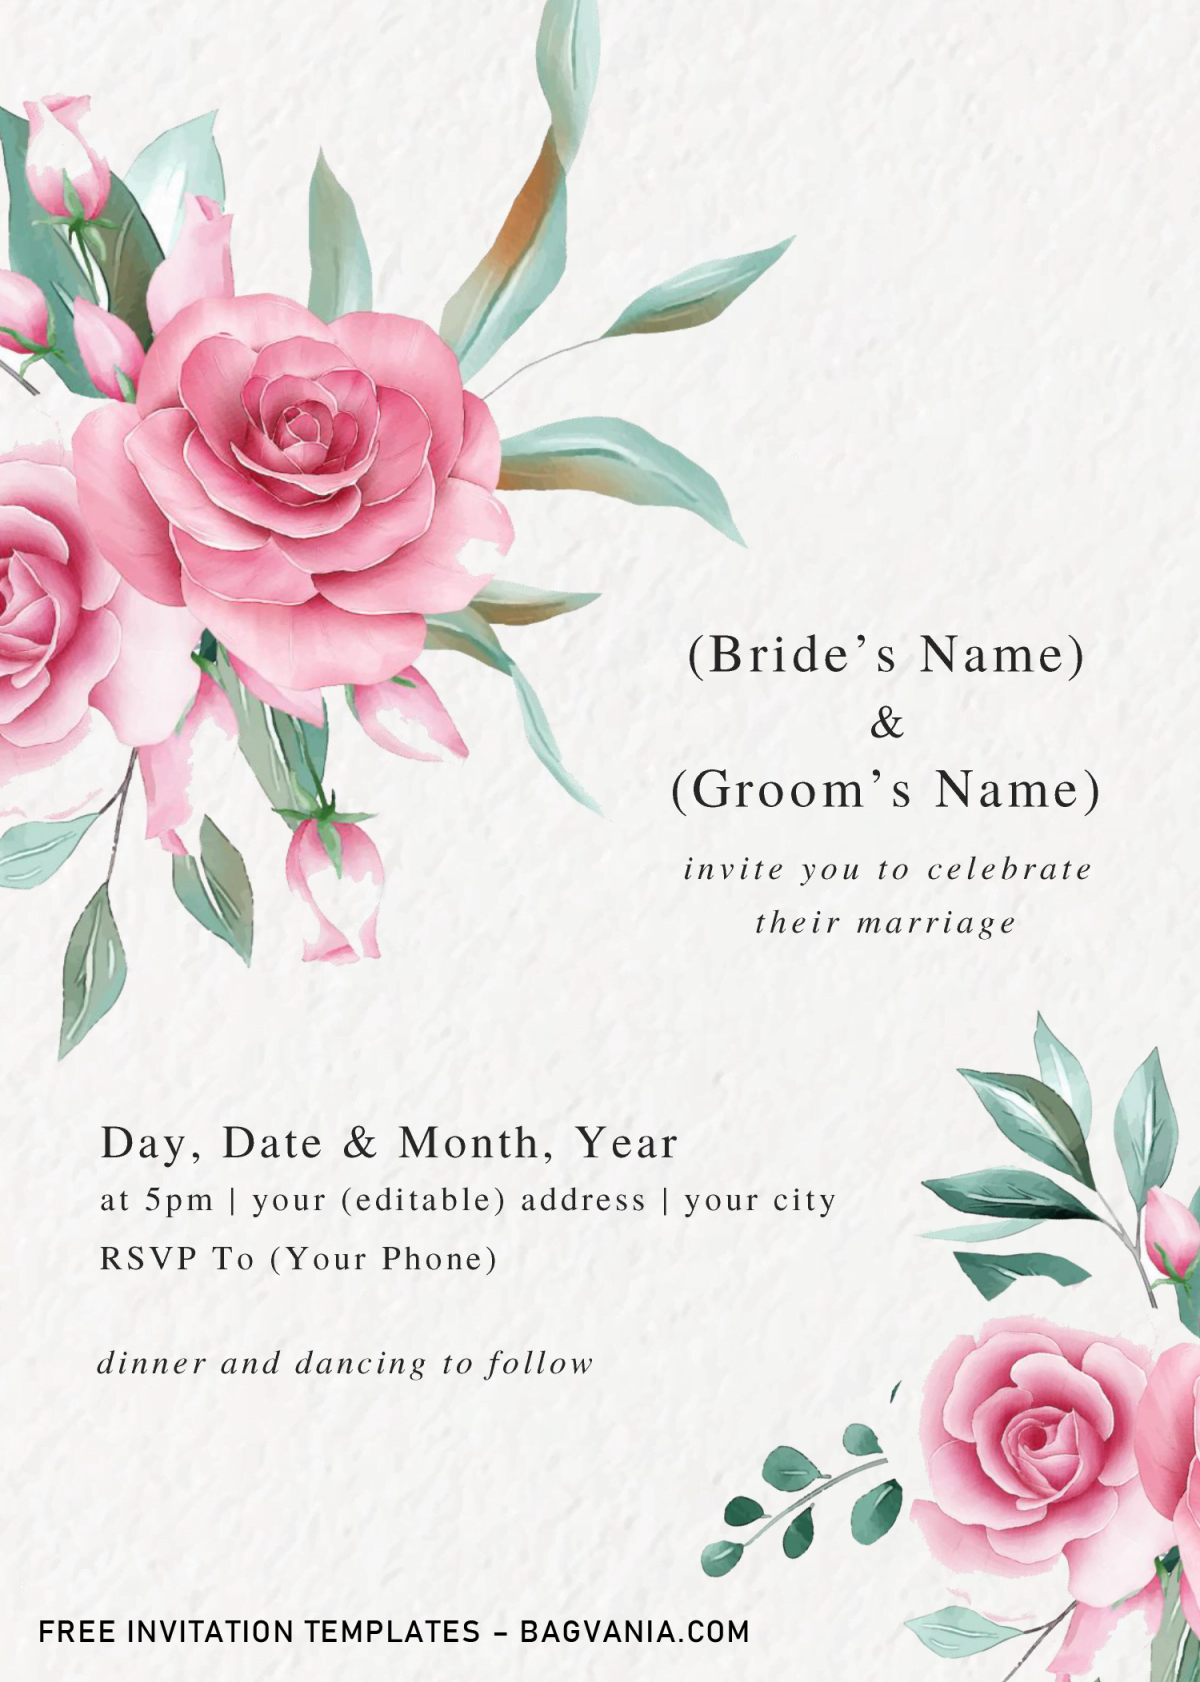 Floral And Greenery Invitation Templates - Editable With Microsoft Word and has blush pink roses